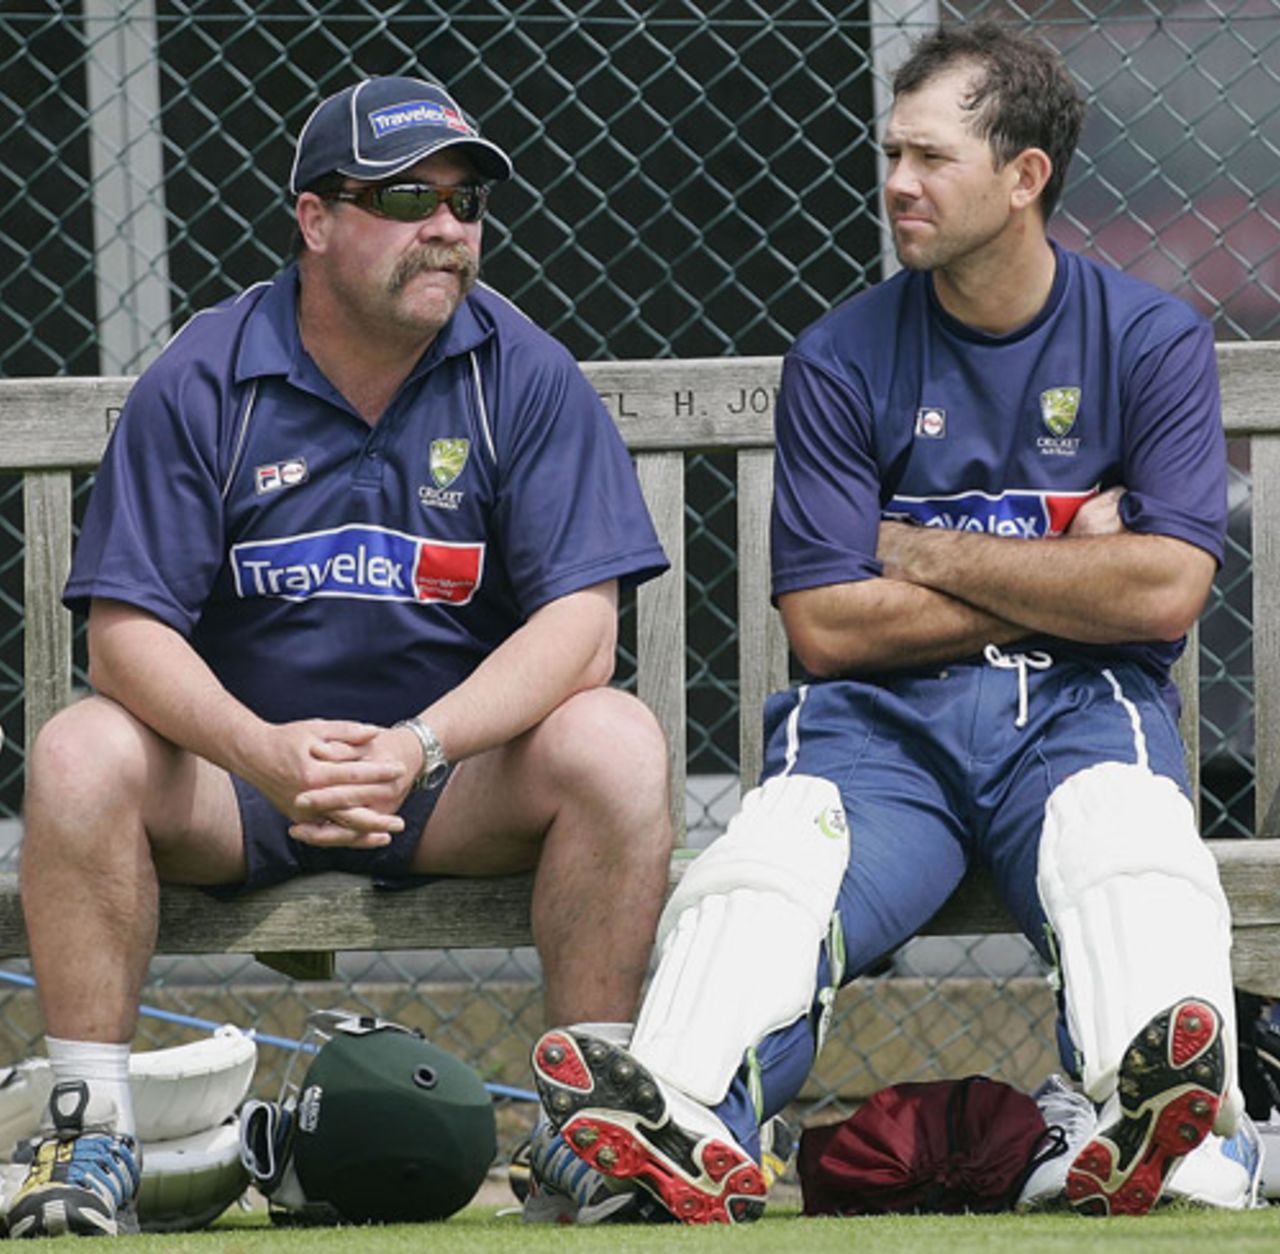 David Boon and Ricky Ponting in contemplative mood during a net session, Birmingham, August 2, 2005